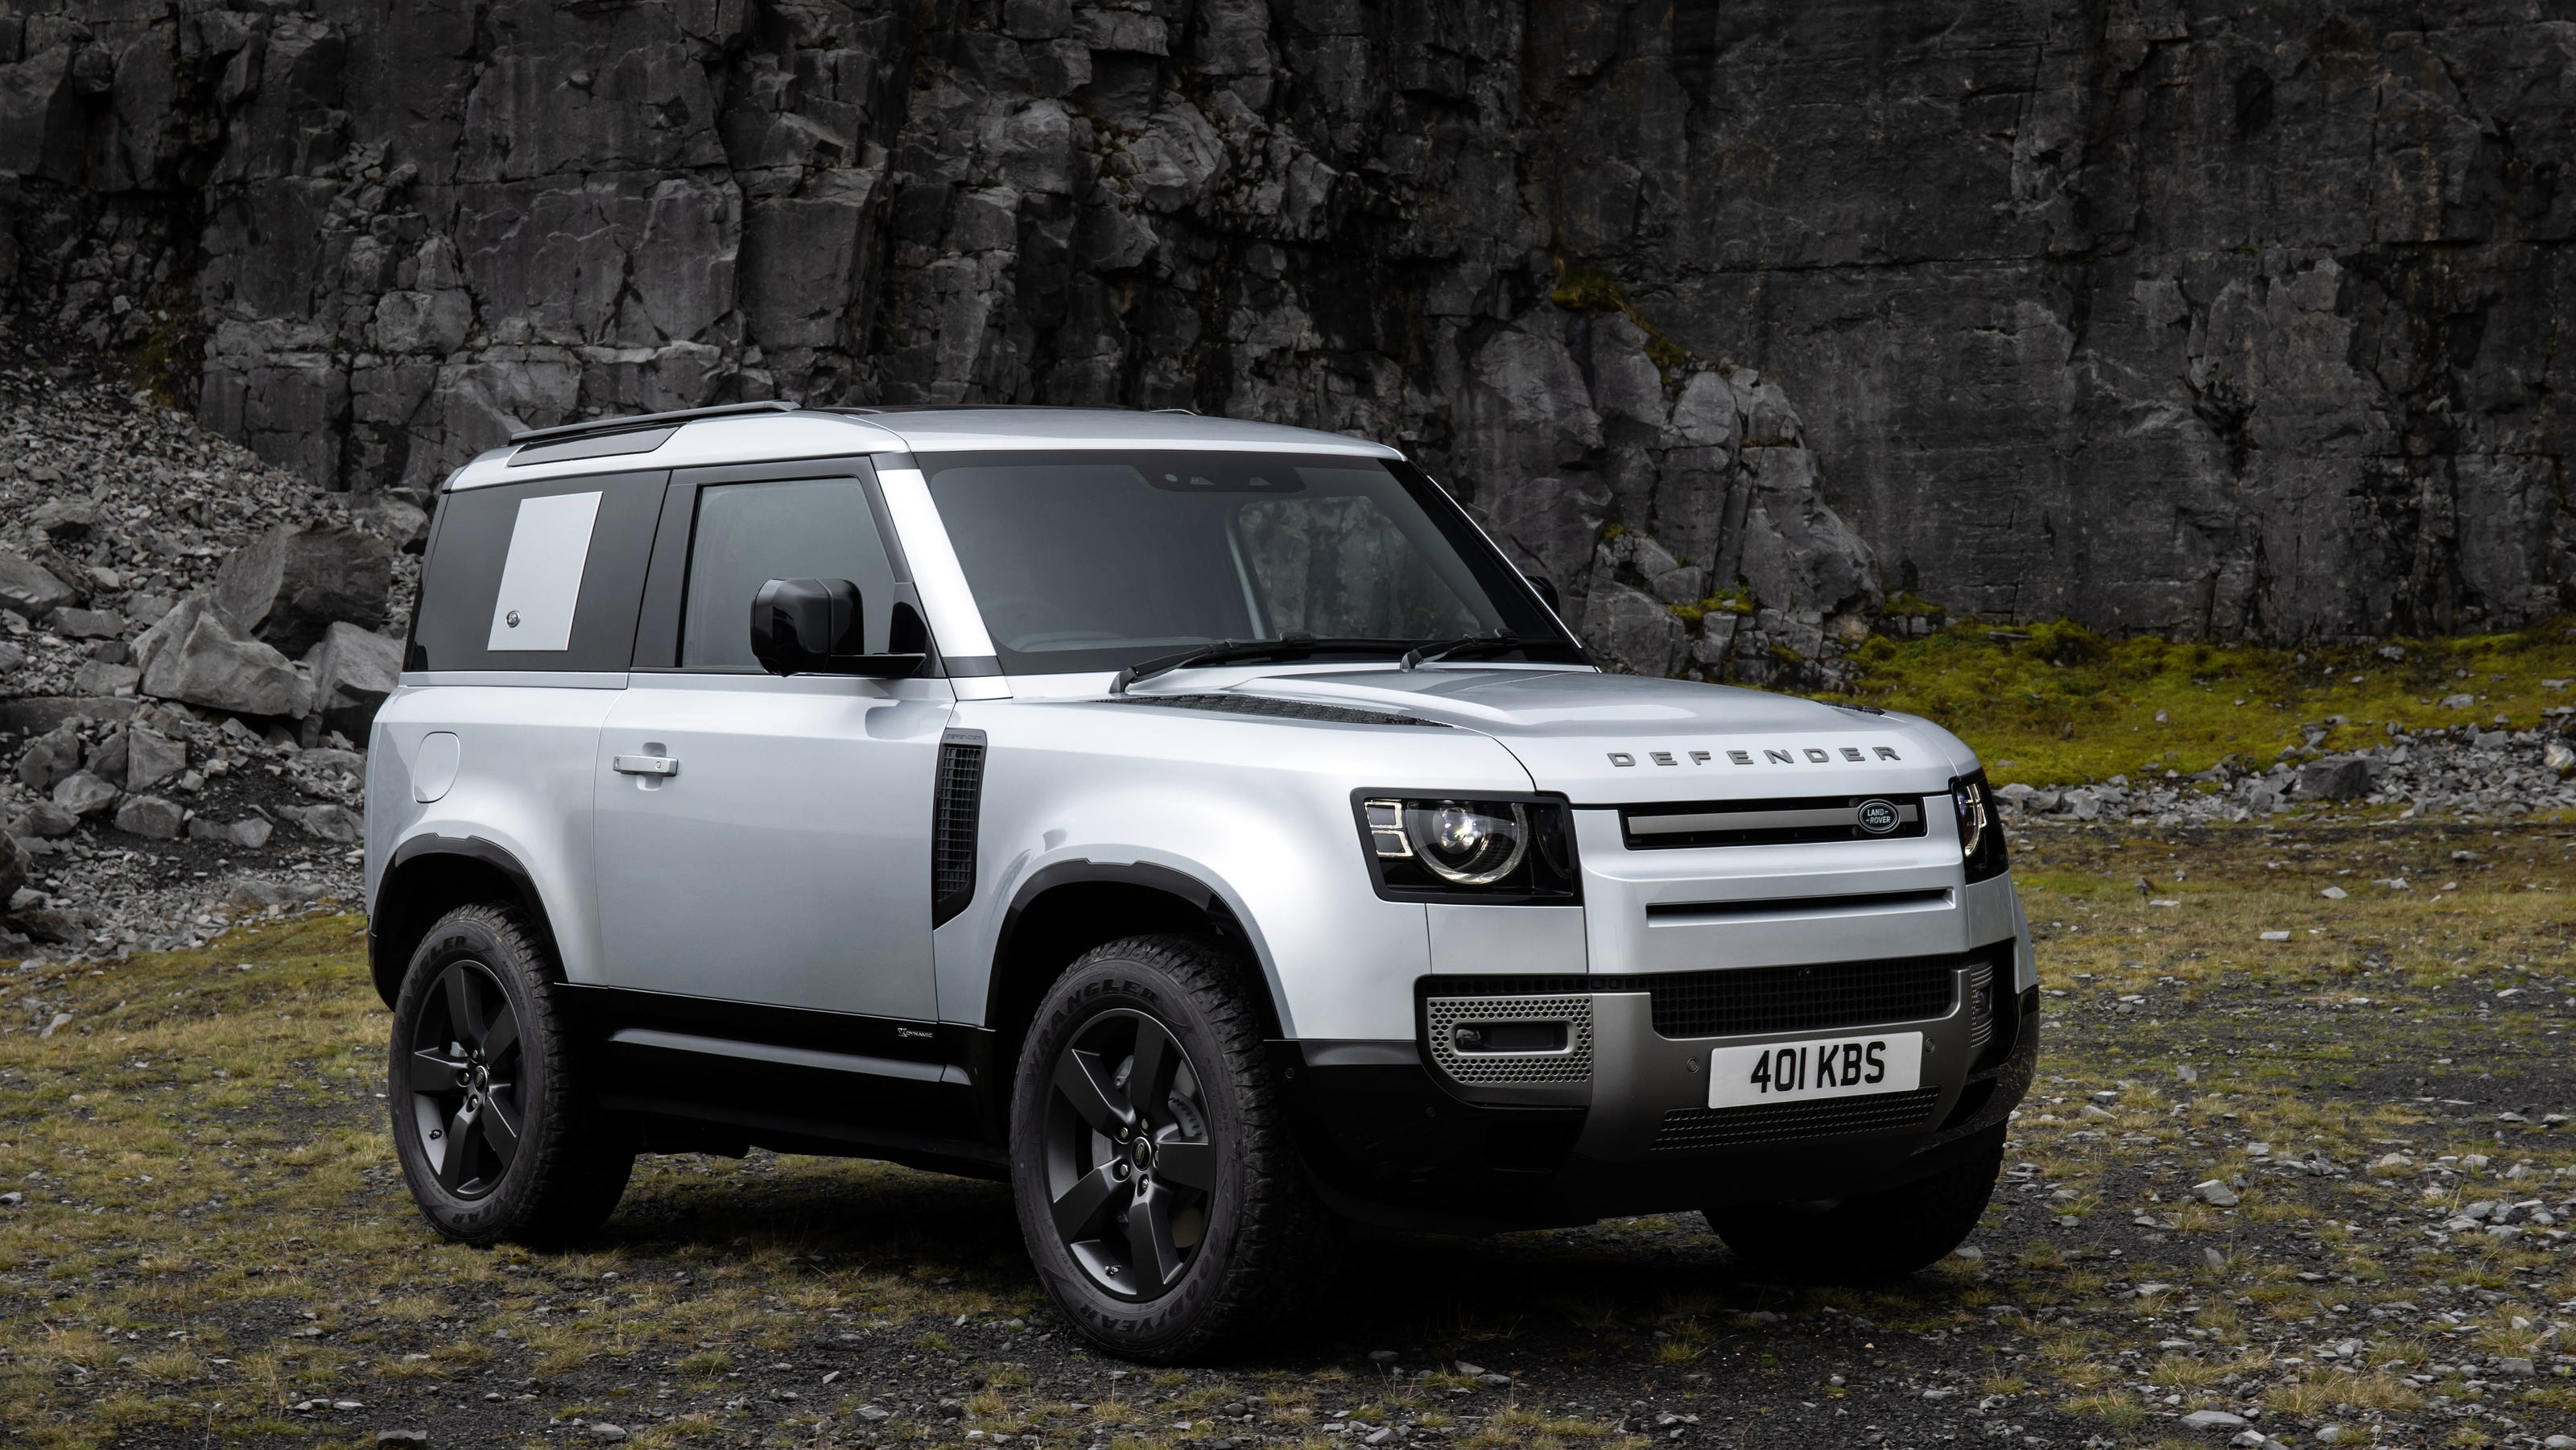 Stoel vergeven acuut Review: 2021 Land Rover Defender is a skillful update of a storied SUV